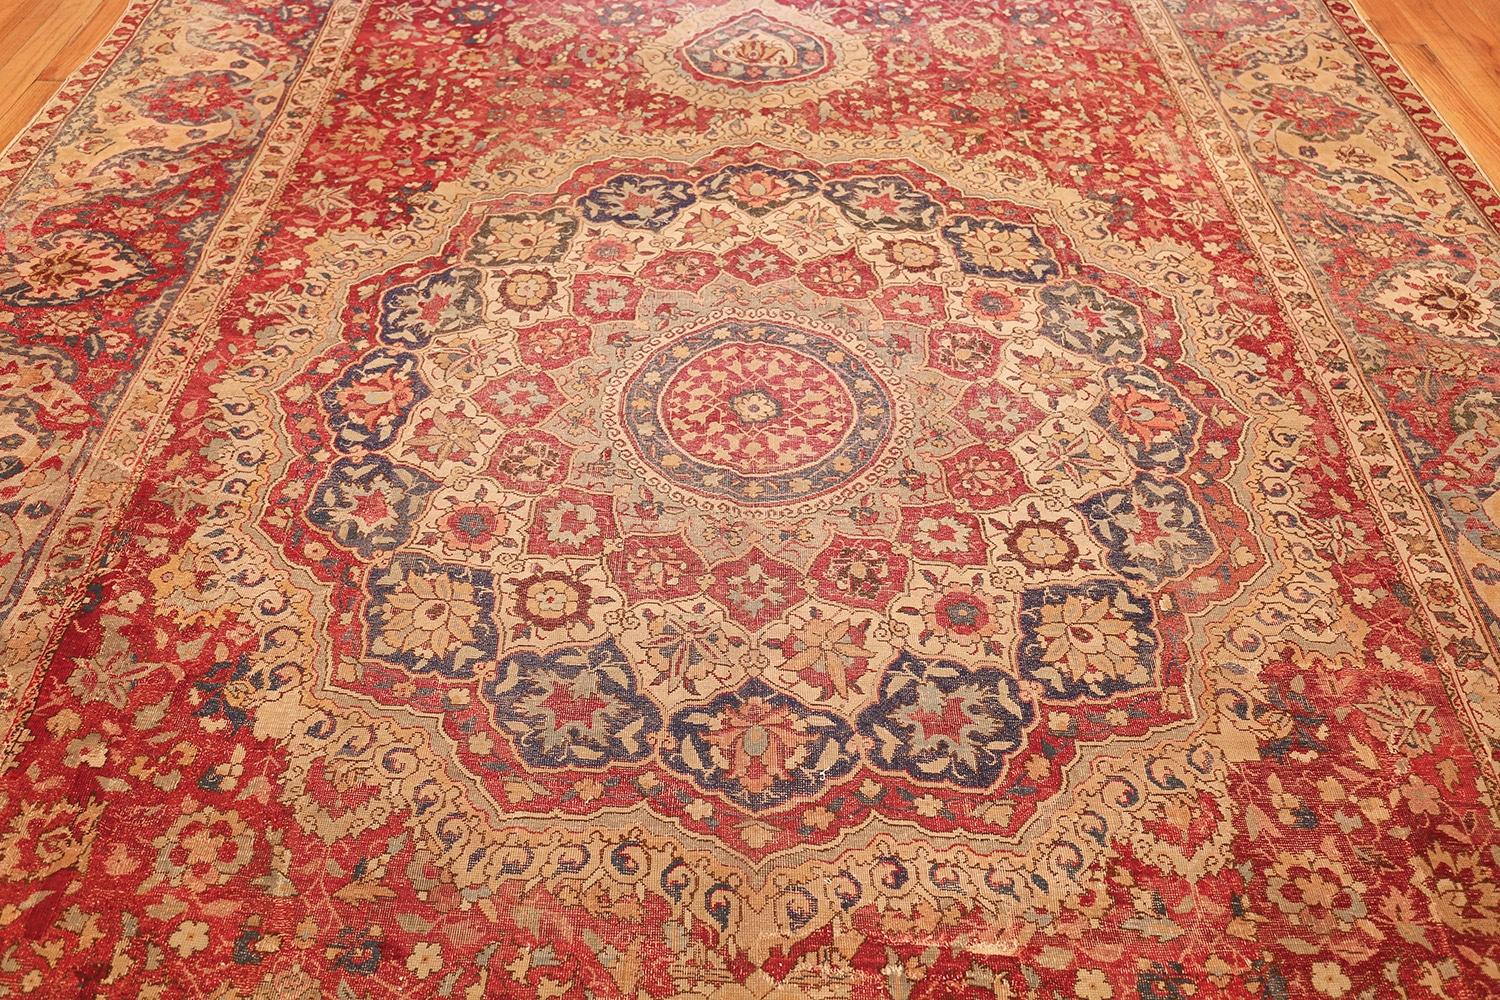 18th Century and Earlier Nazmiyal Collection 17th Century Mughal Gallery Carpet. Size: 9 ft x 24 ft 8 in 